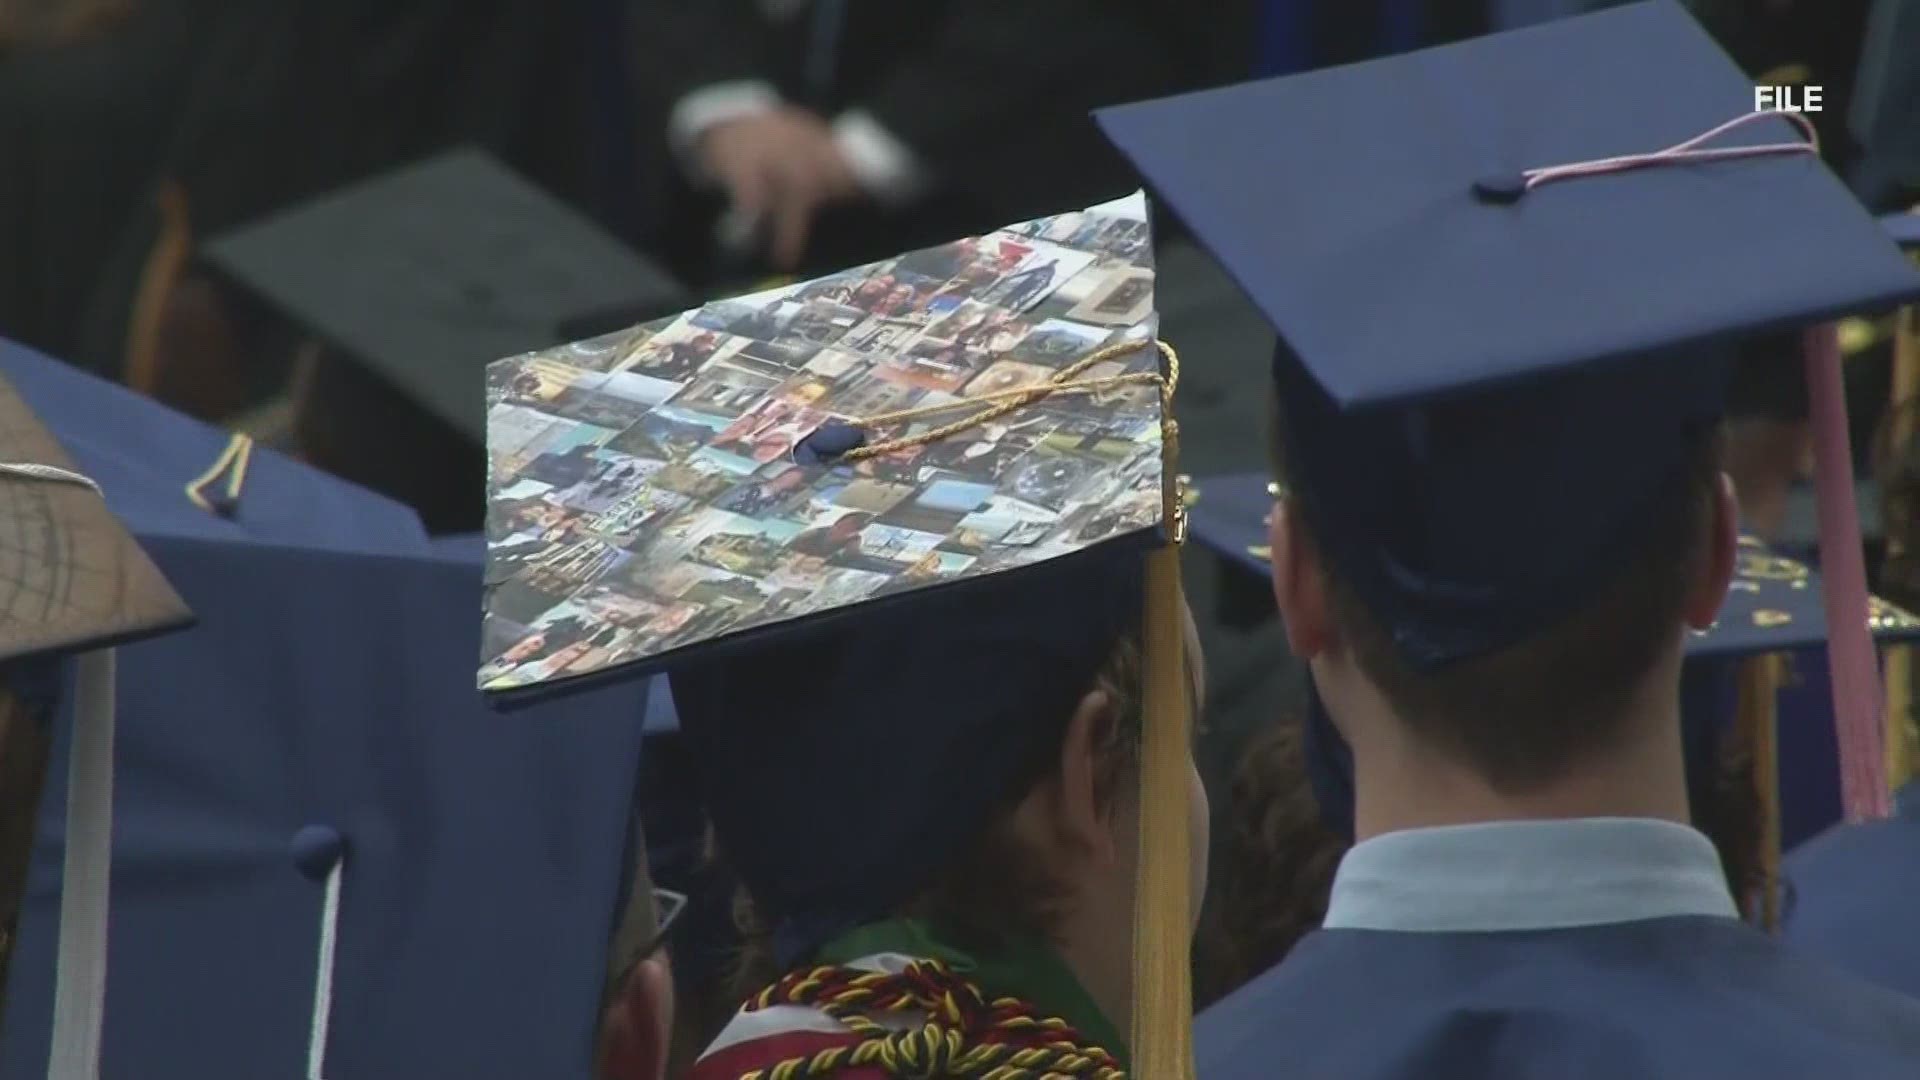 Students graduation soon call the University of Maine's decision for virtual ceremony "devastating," and most hope for a safe in-person way to receive their diplomas